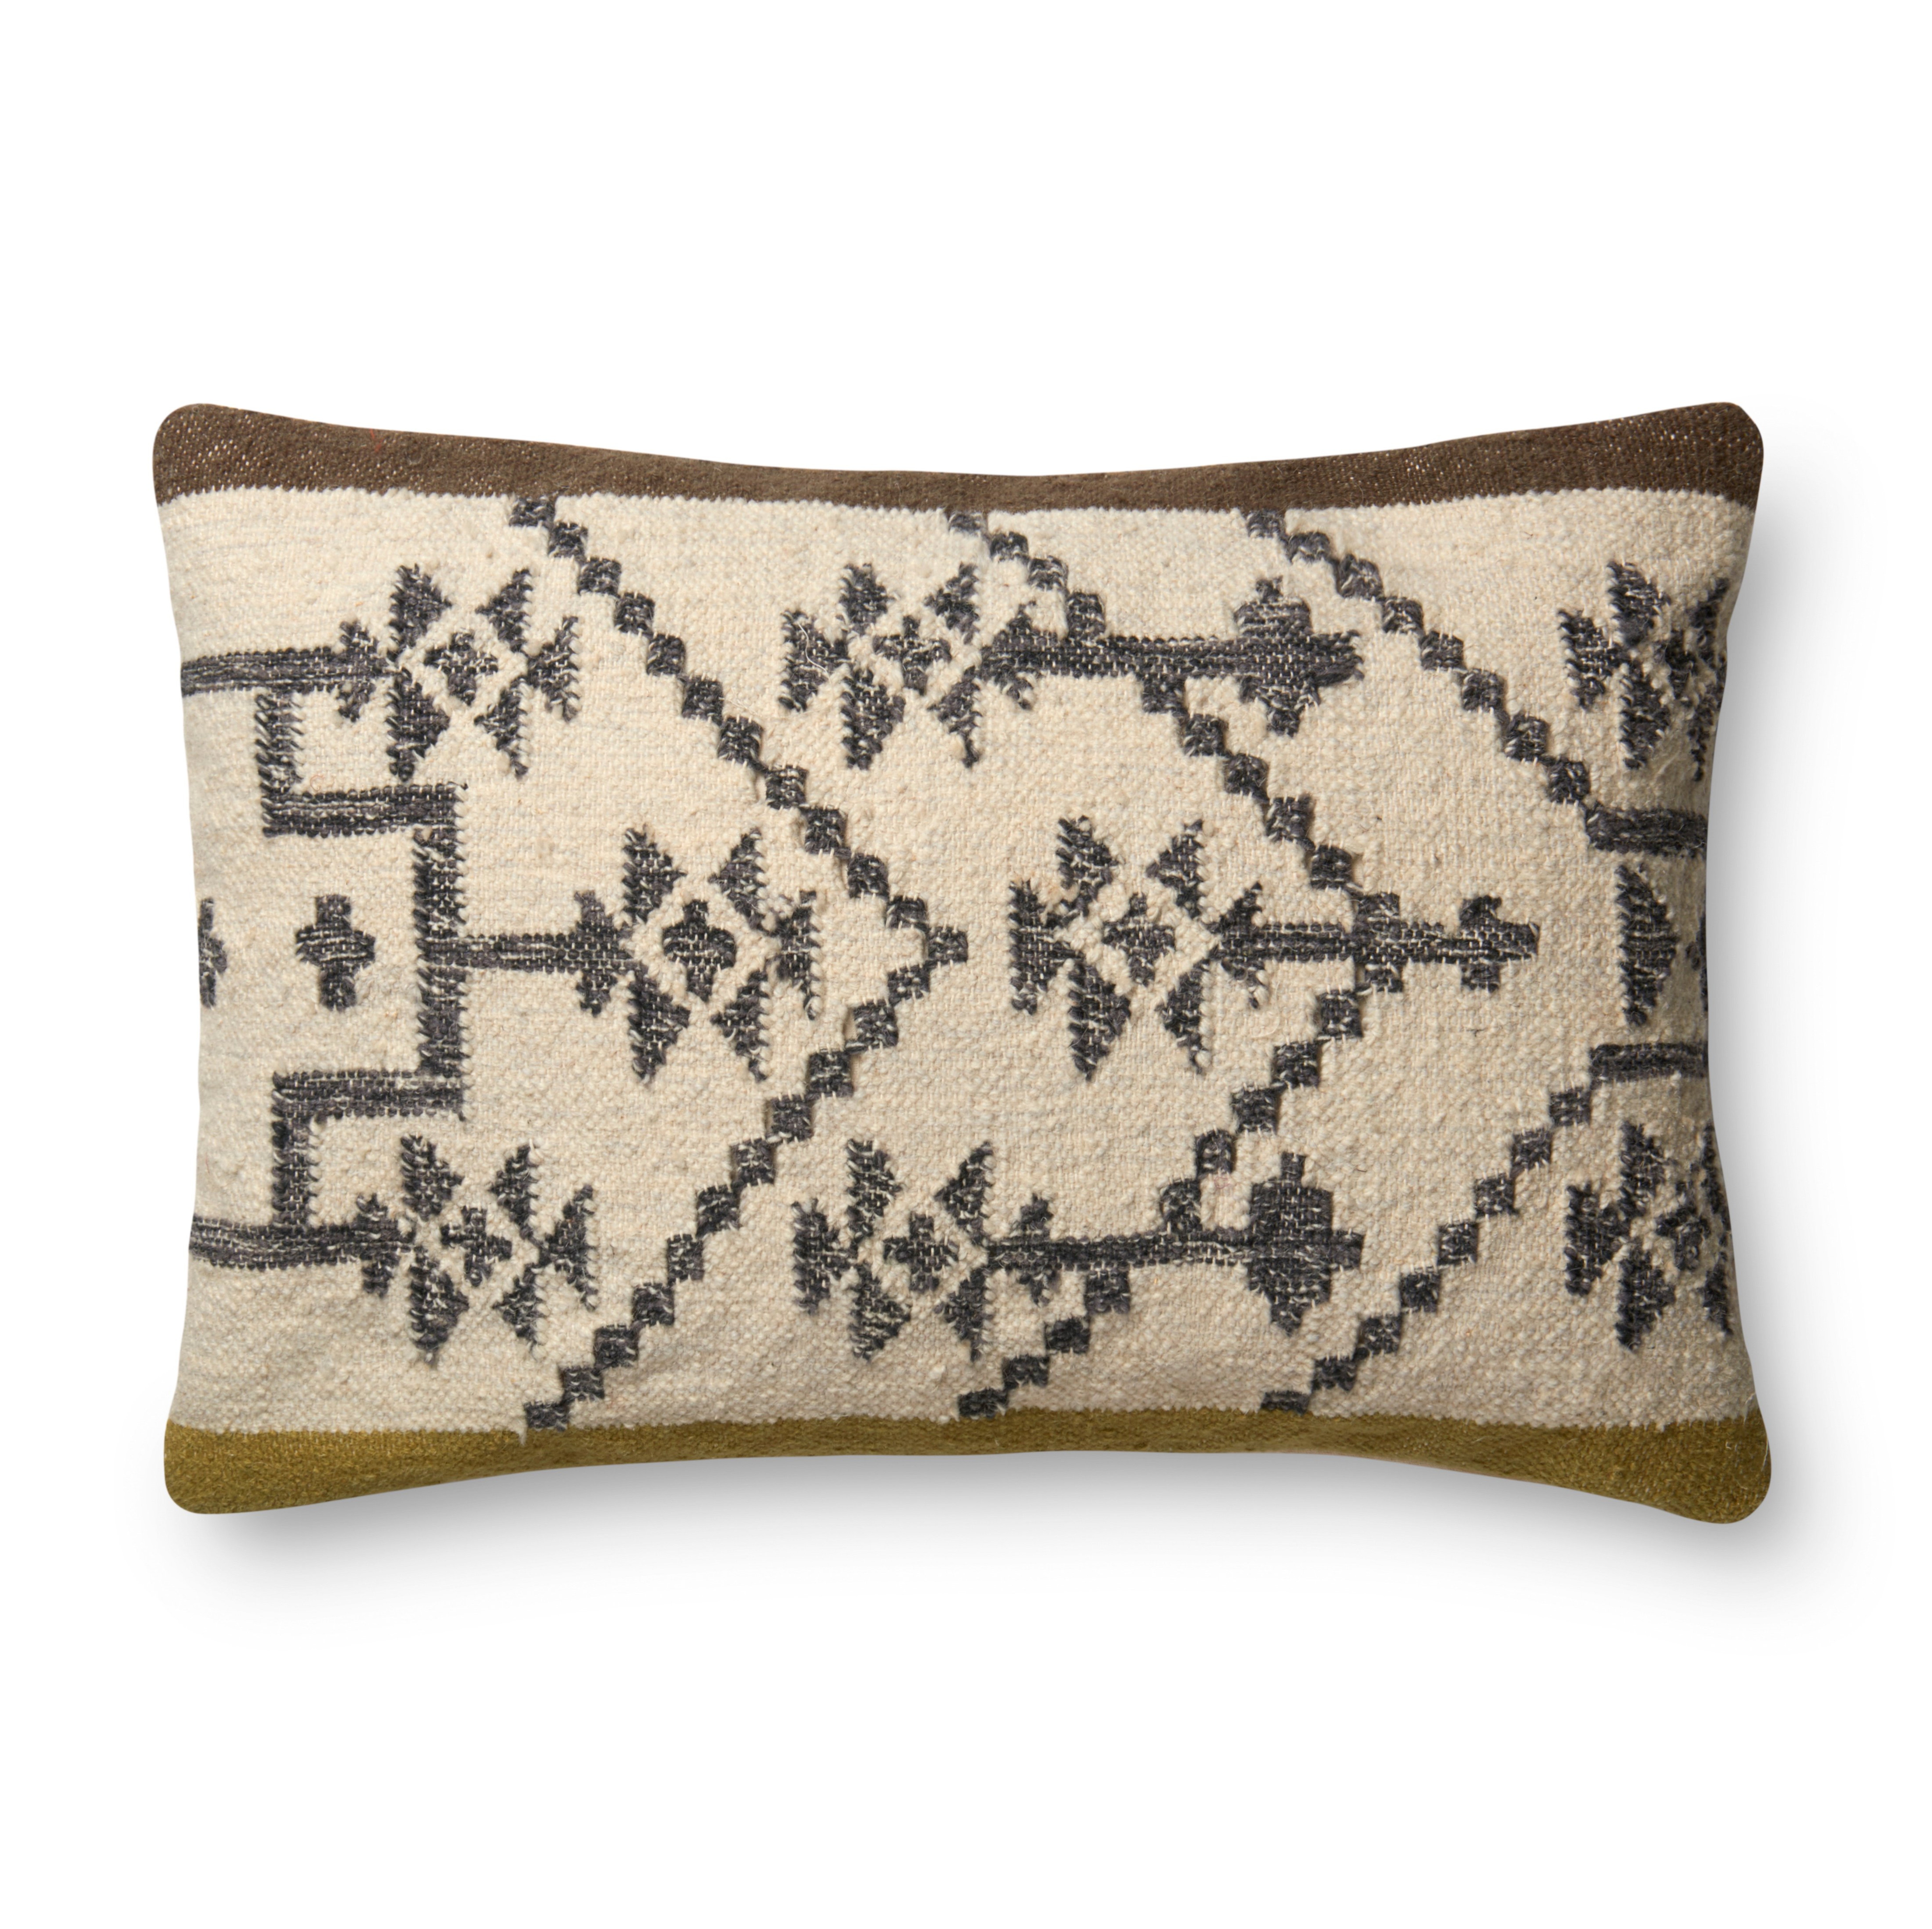 Lumbar Pillow, Olive & Taupe, 16" x 26" - ED Ellen DeGeneres Crafted by Loloi Rugs